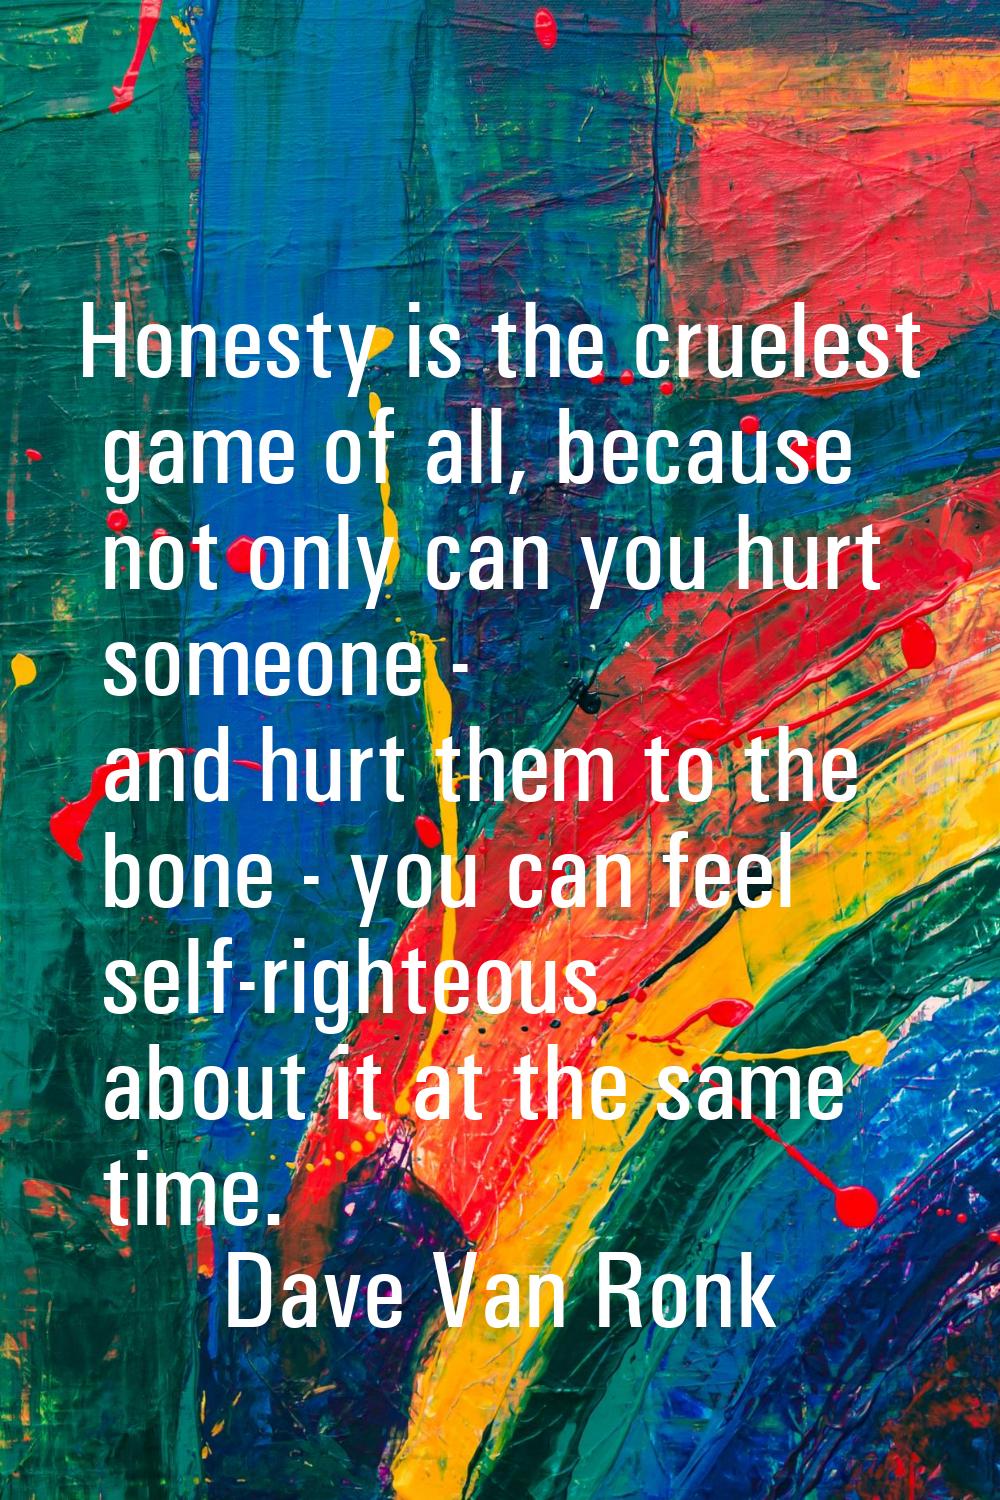 Honesty is the cruelest game of all, because not only can you hurt someone - and hurt them to the b